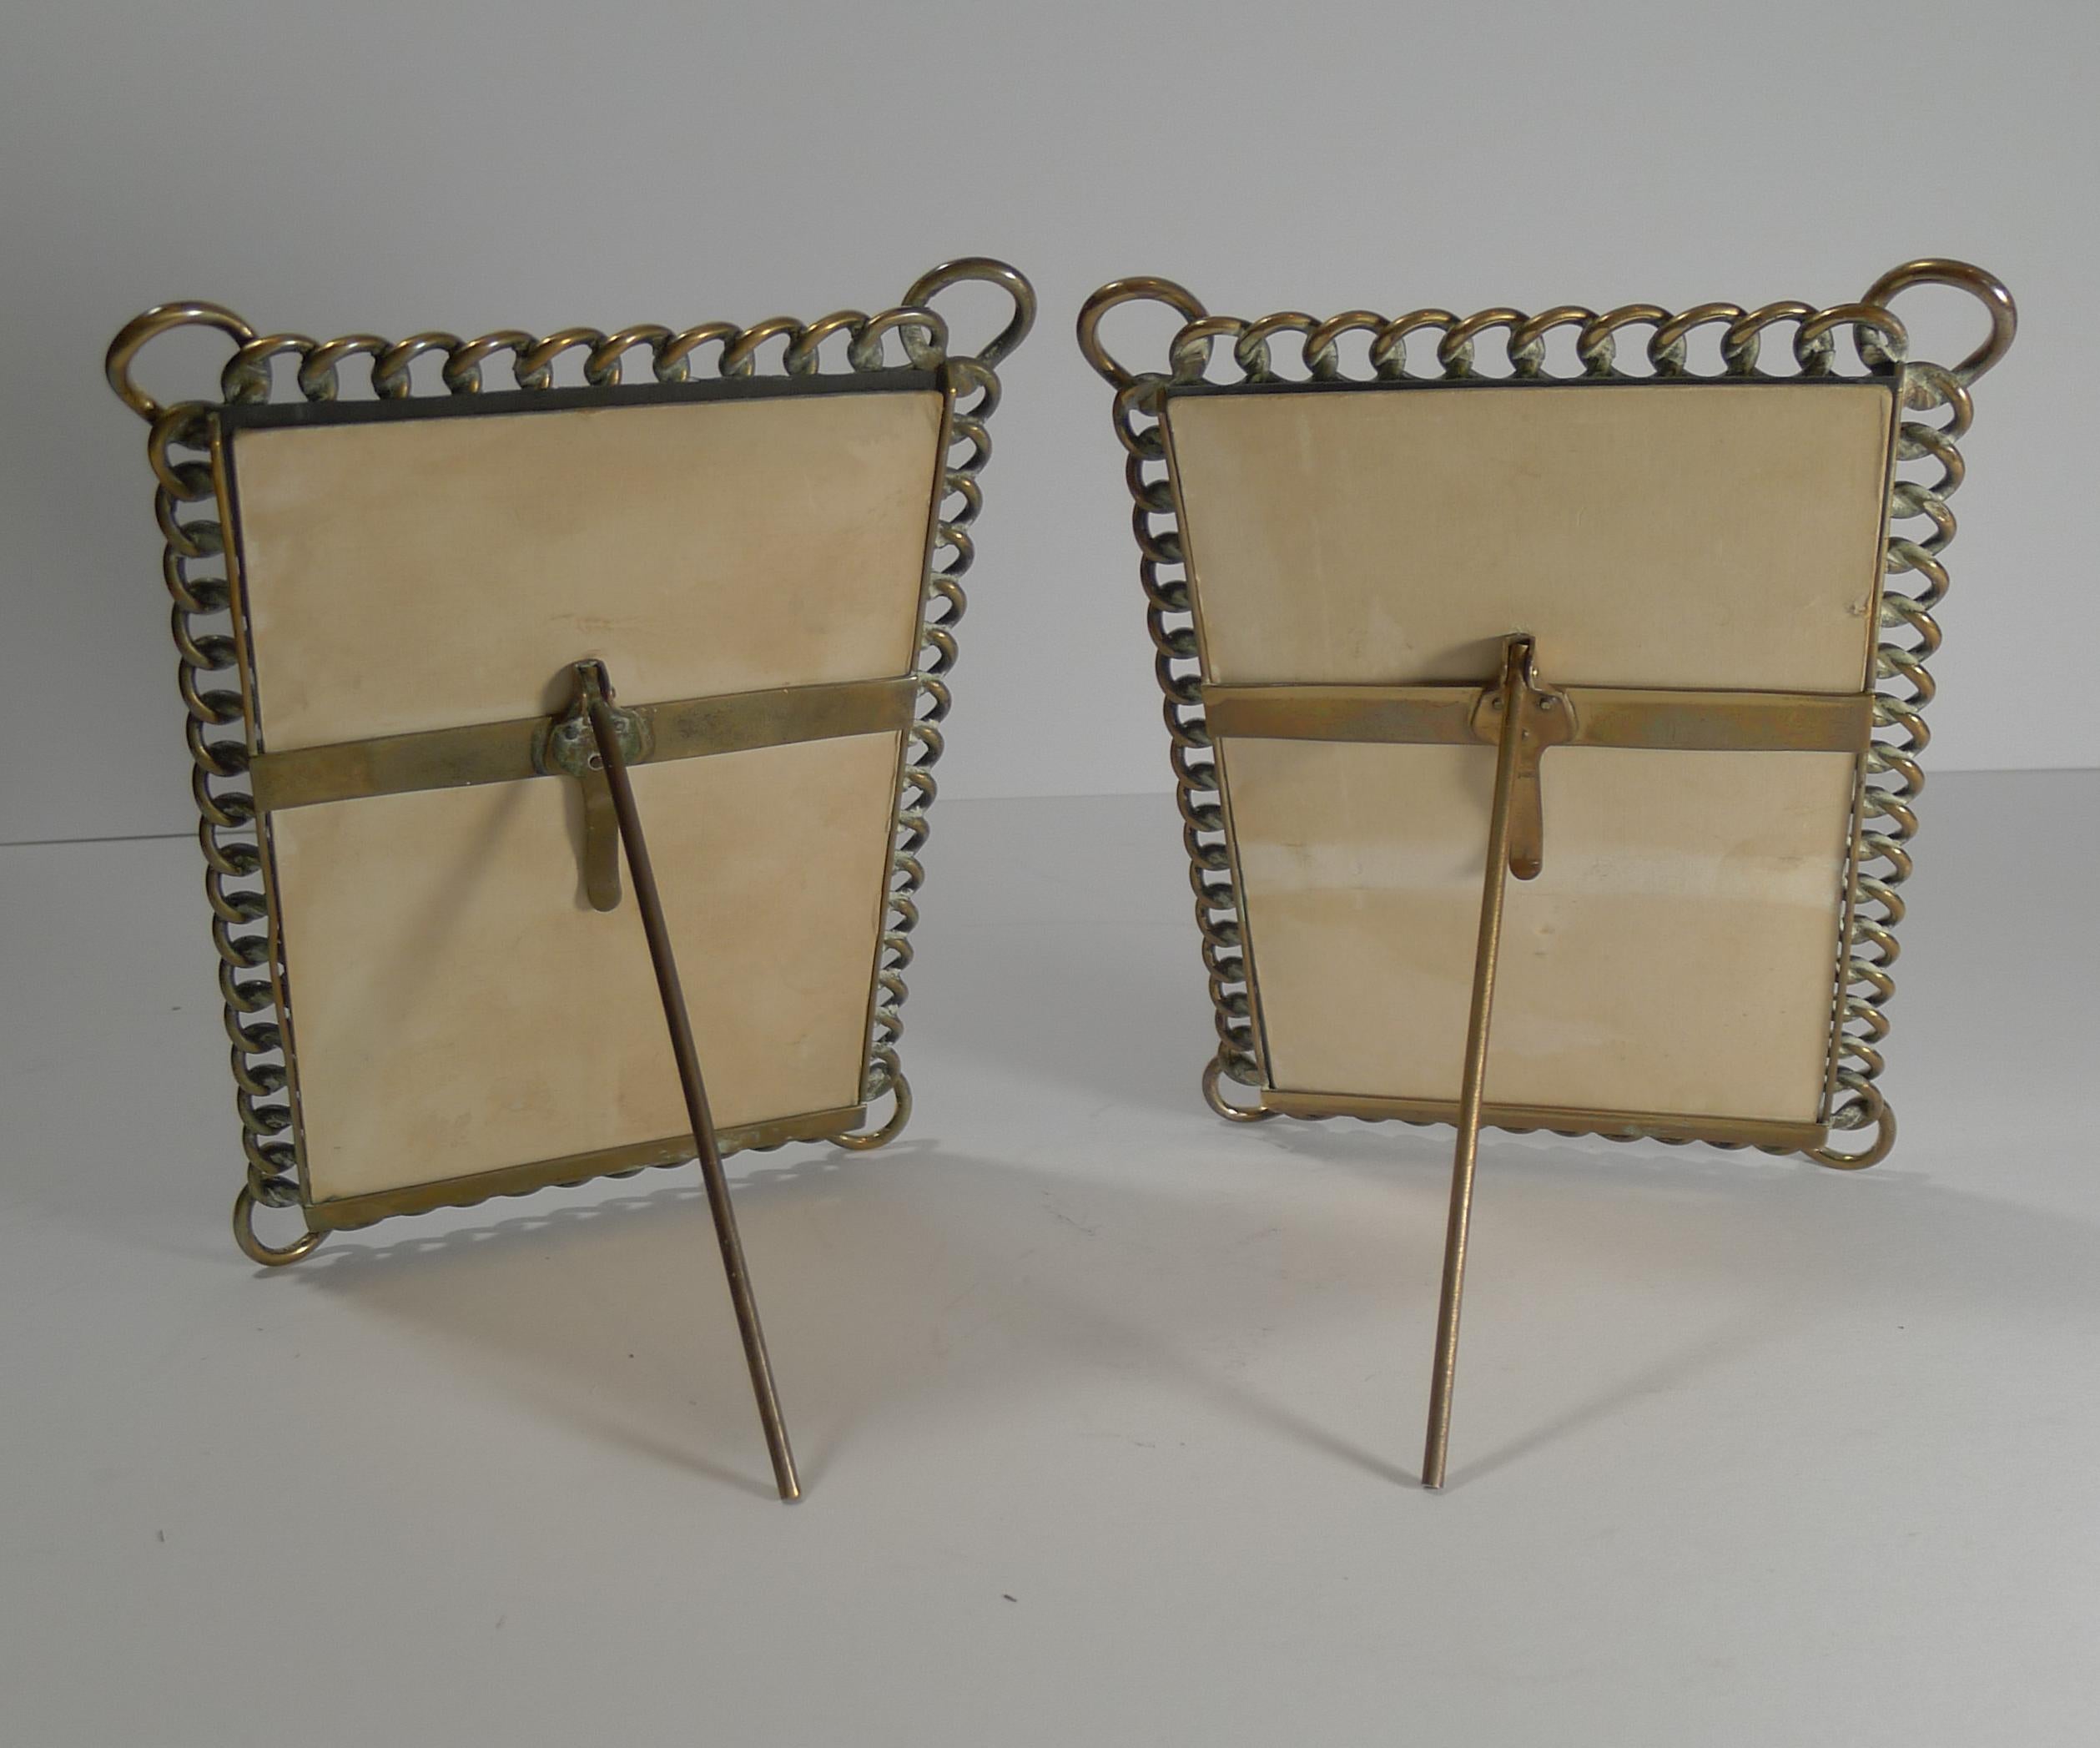 Late 19th Century Pair of Antique English Polished Brass Ring Photograph Frames, circa 1890